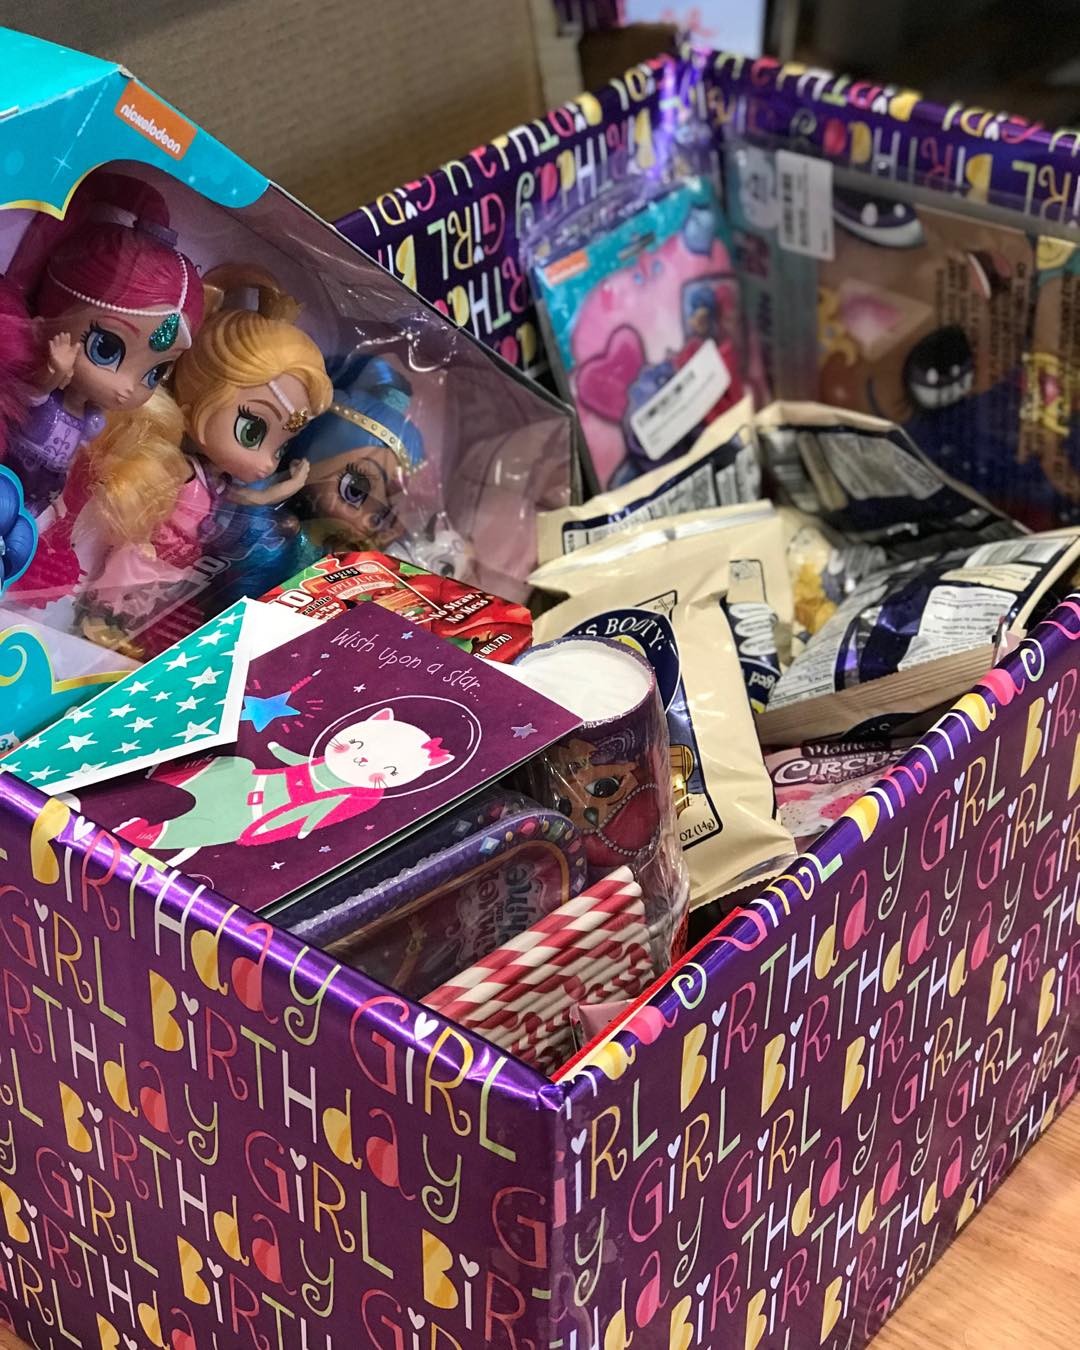 Sharing Happy Birthdays is such a great charity in Austin. Thru volunteers they coordinate bday boxes for homeless and foster children.  This is a Shimmer and Shine box we put together for a 3 year old 😘💕🎁 #love #sharingbirthdayjoy